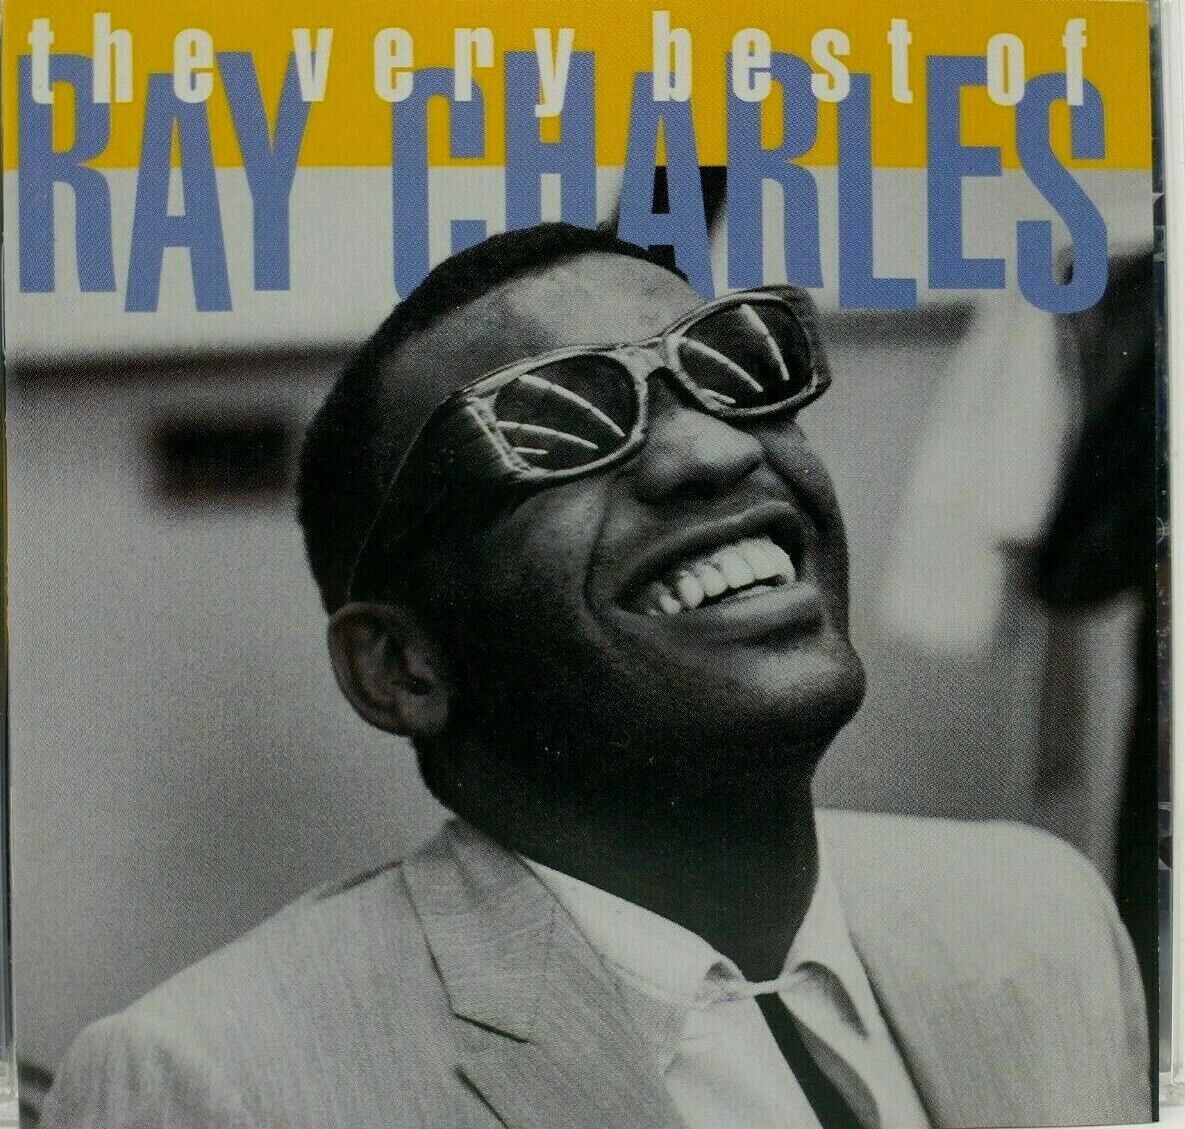 Artist + Title:Ray Charles : The Very Best Of (2000) Rhino - MINT:CD LOT #5 - CLASSIC ROCK / ALTERNATIVE / INDIE / BRIT POP / **MOSTLY MINT**